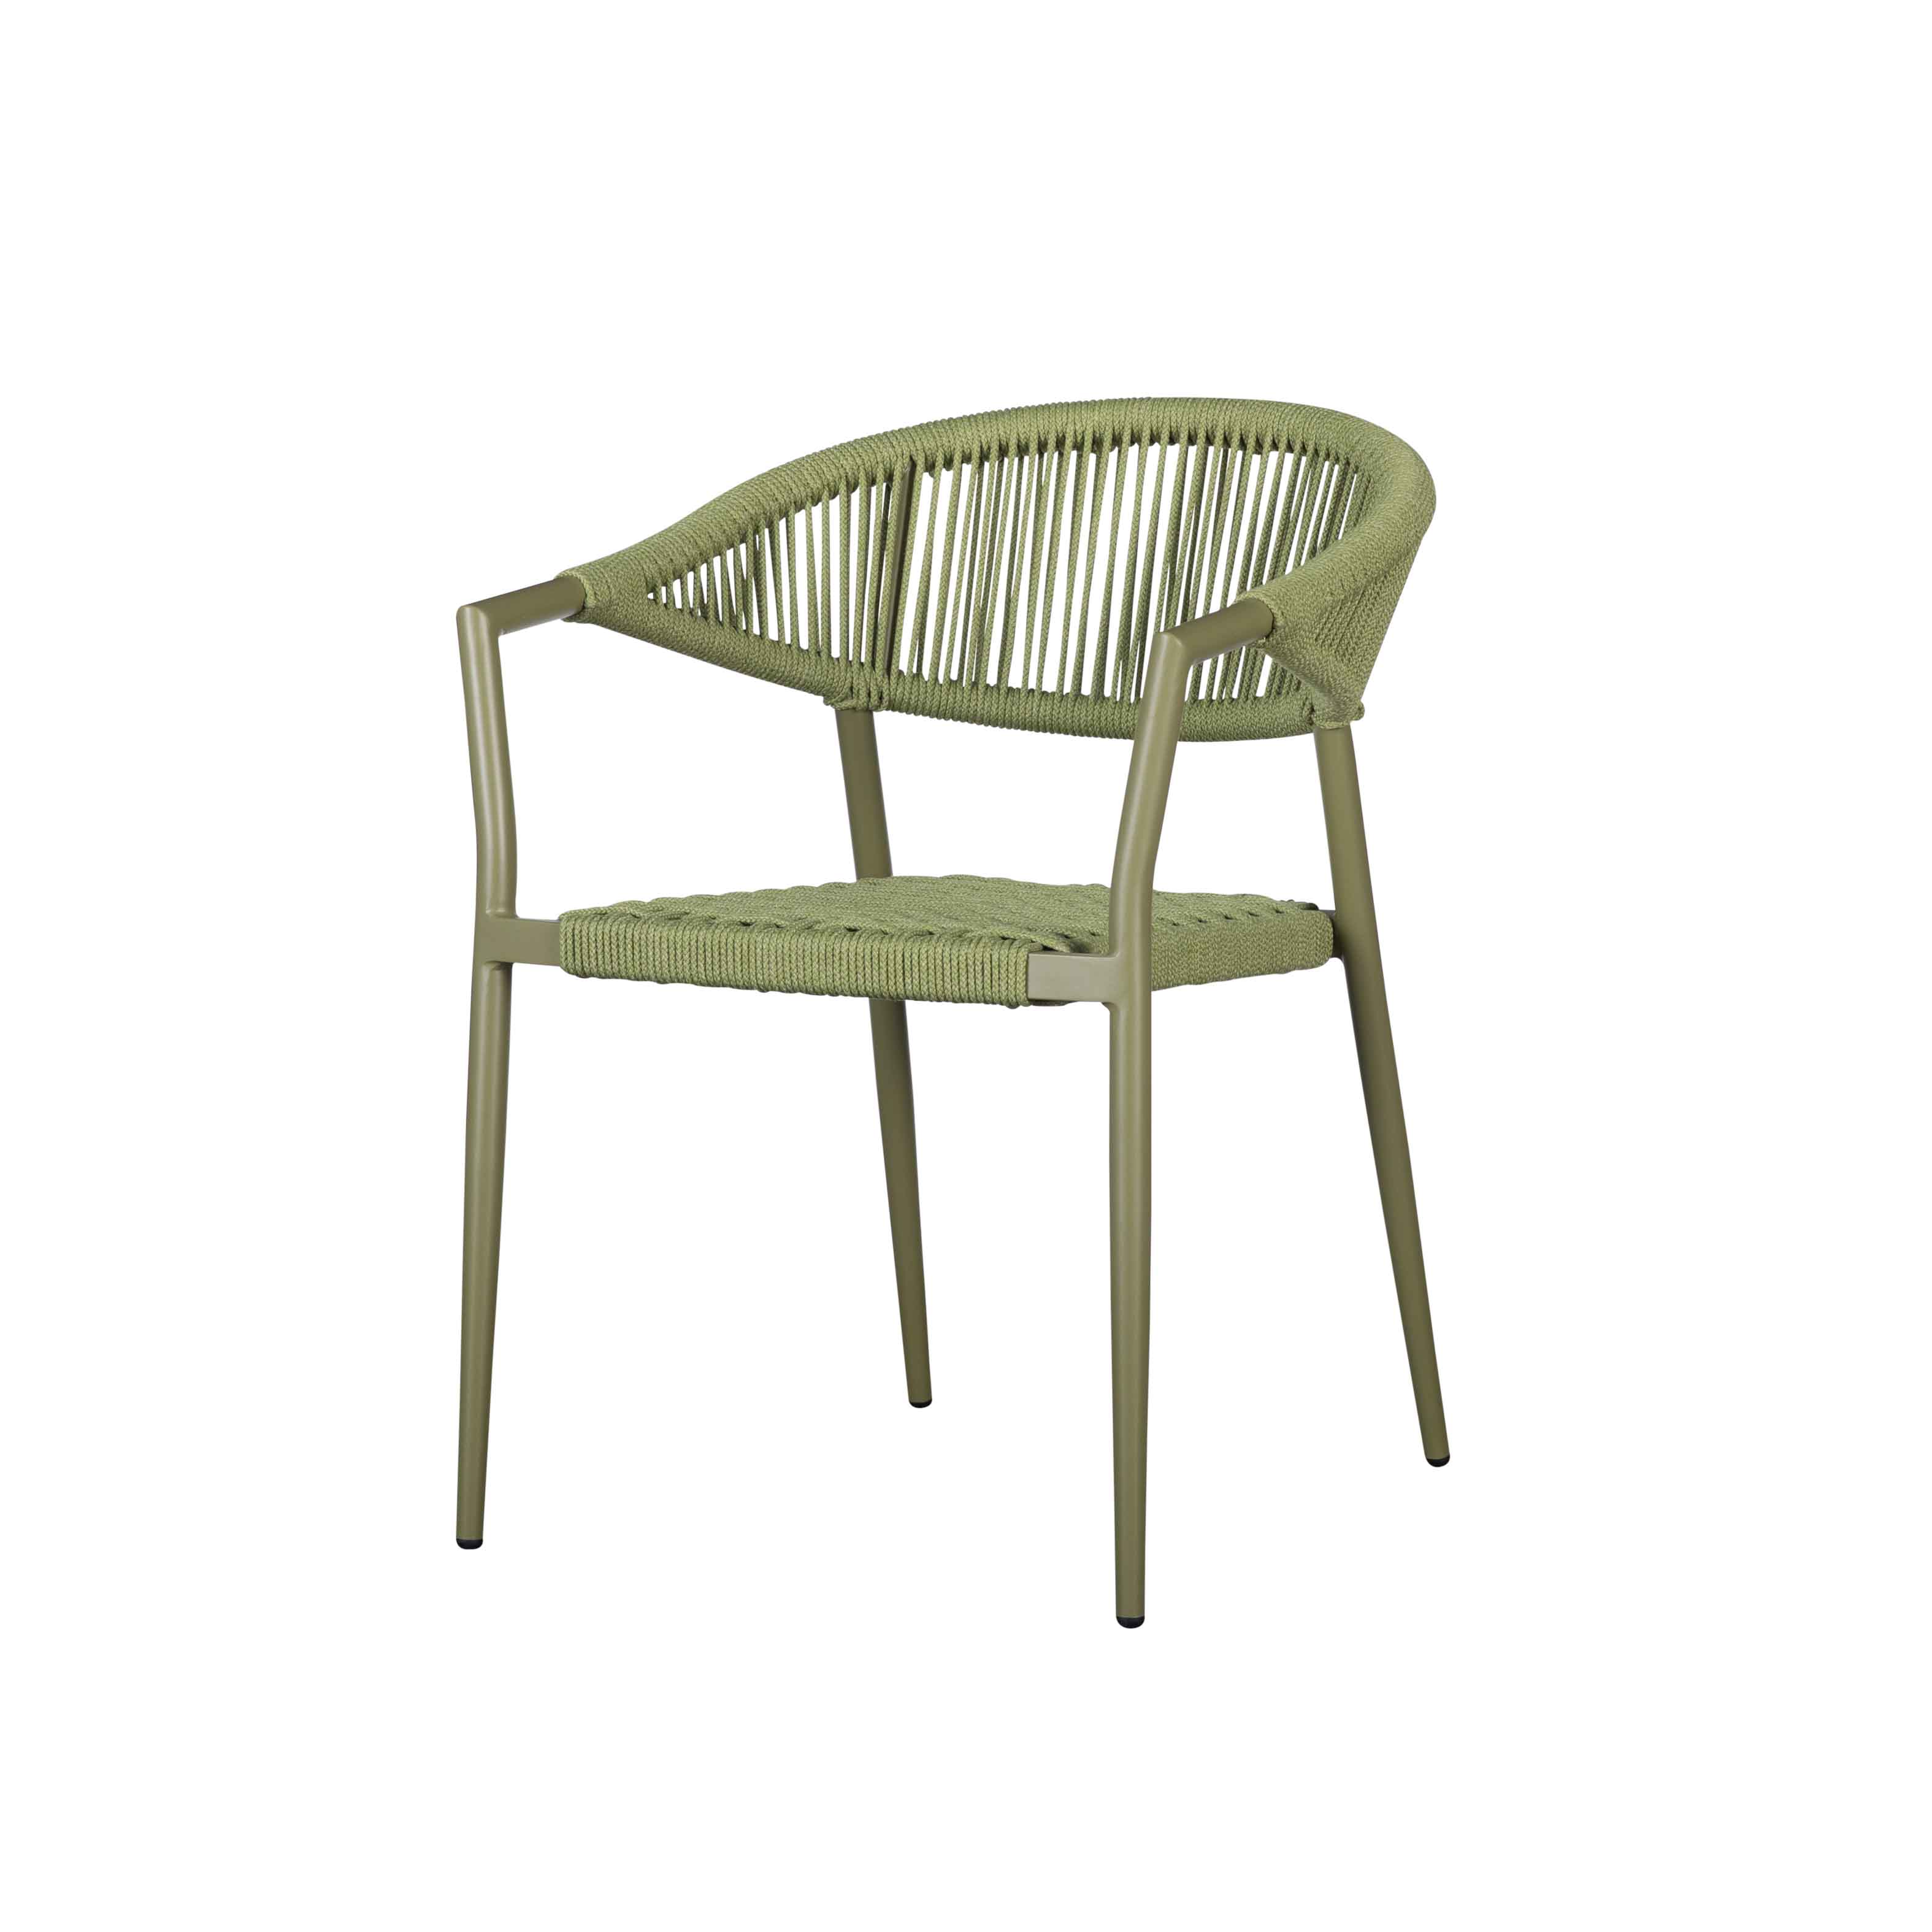 Camila rope dining chair S5